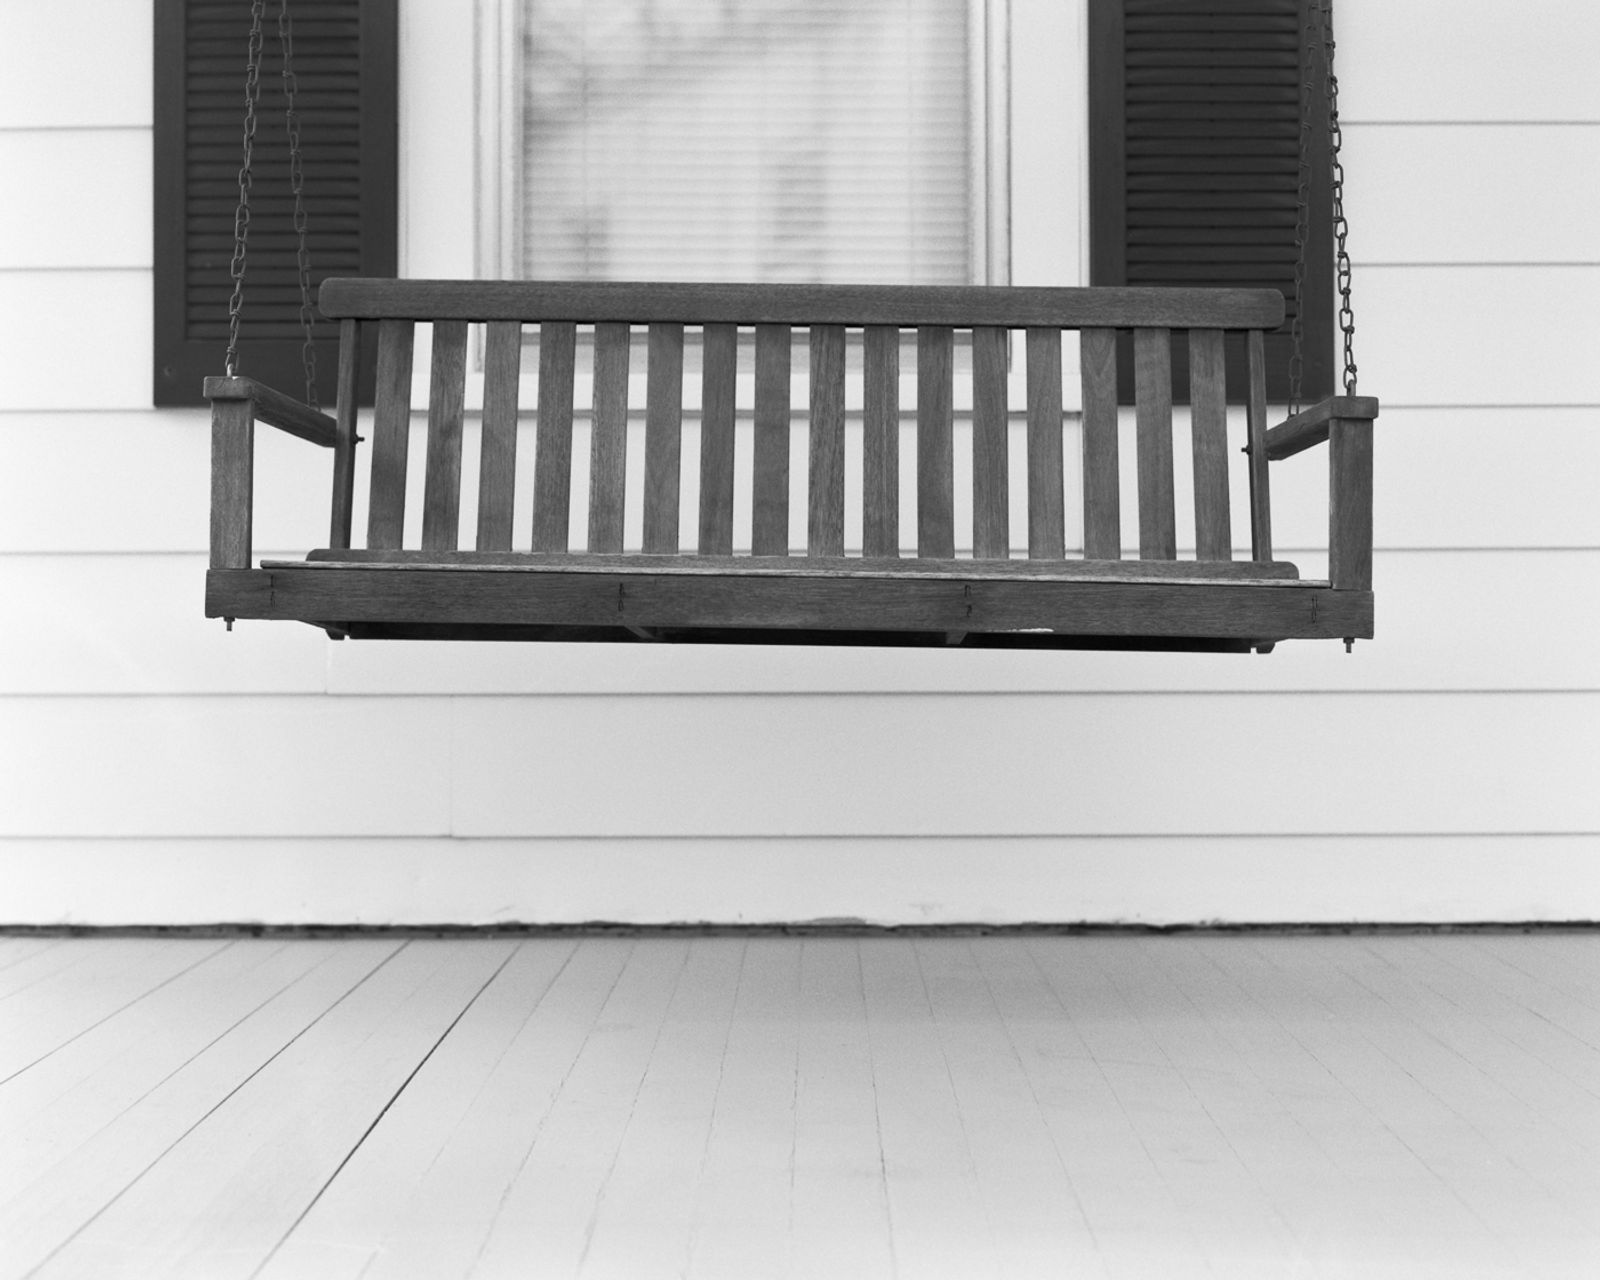 © Drew Leventhal - Porch Swing, Maryland